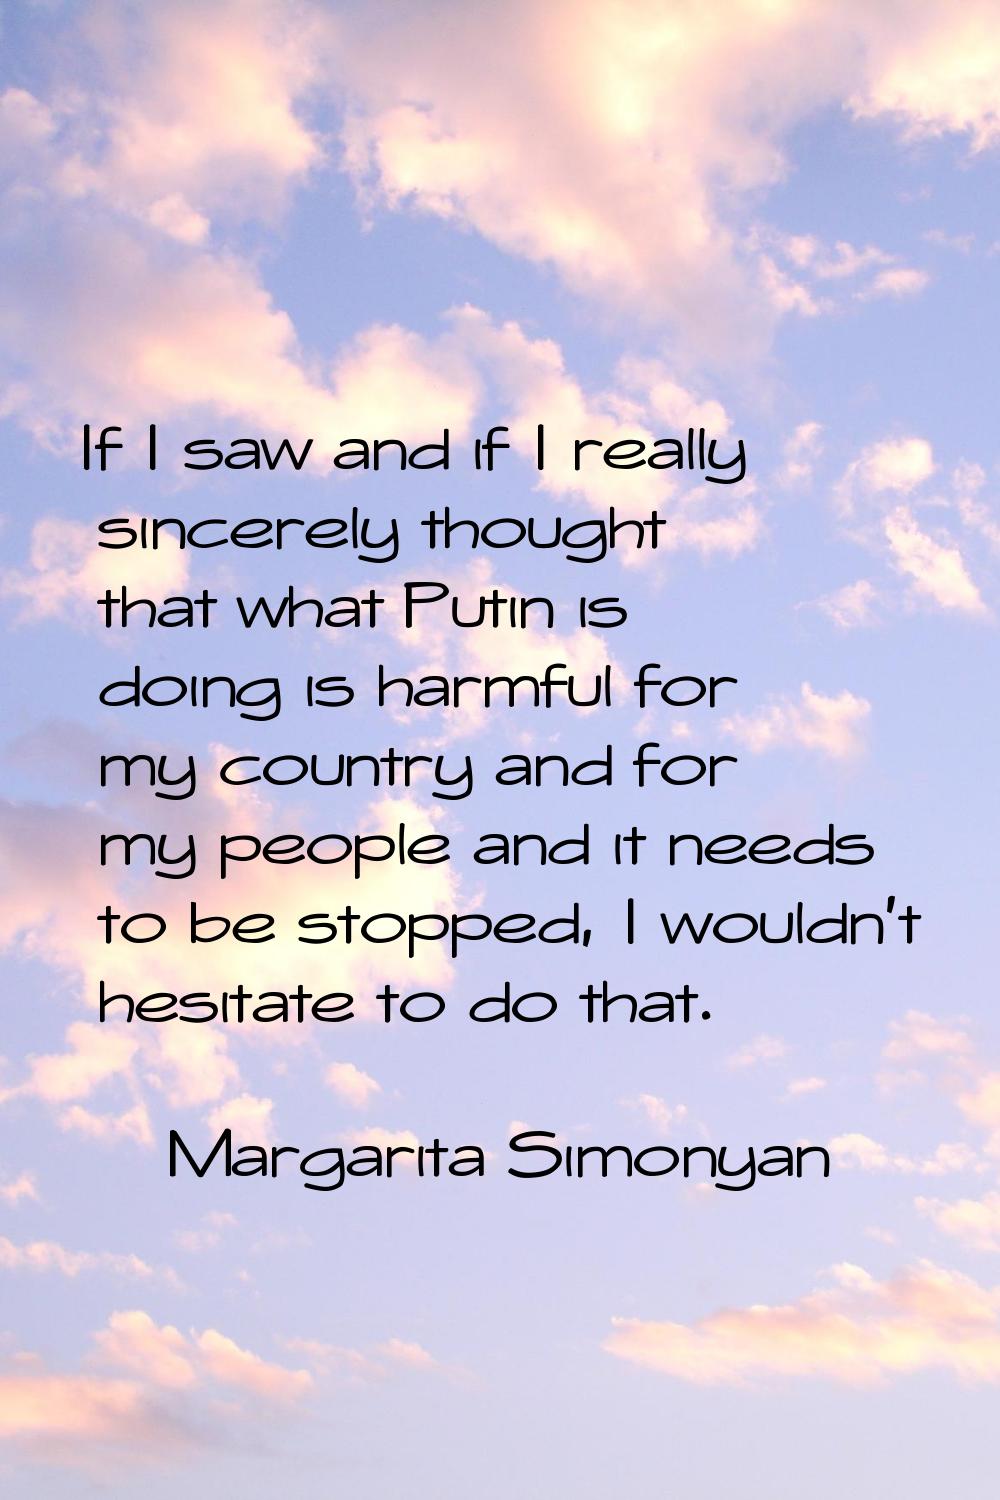 If I saw and if I really sincerely thought that what Putin is doing is harmful for my country and f